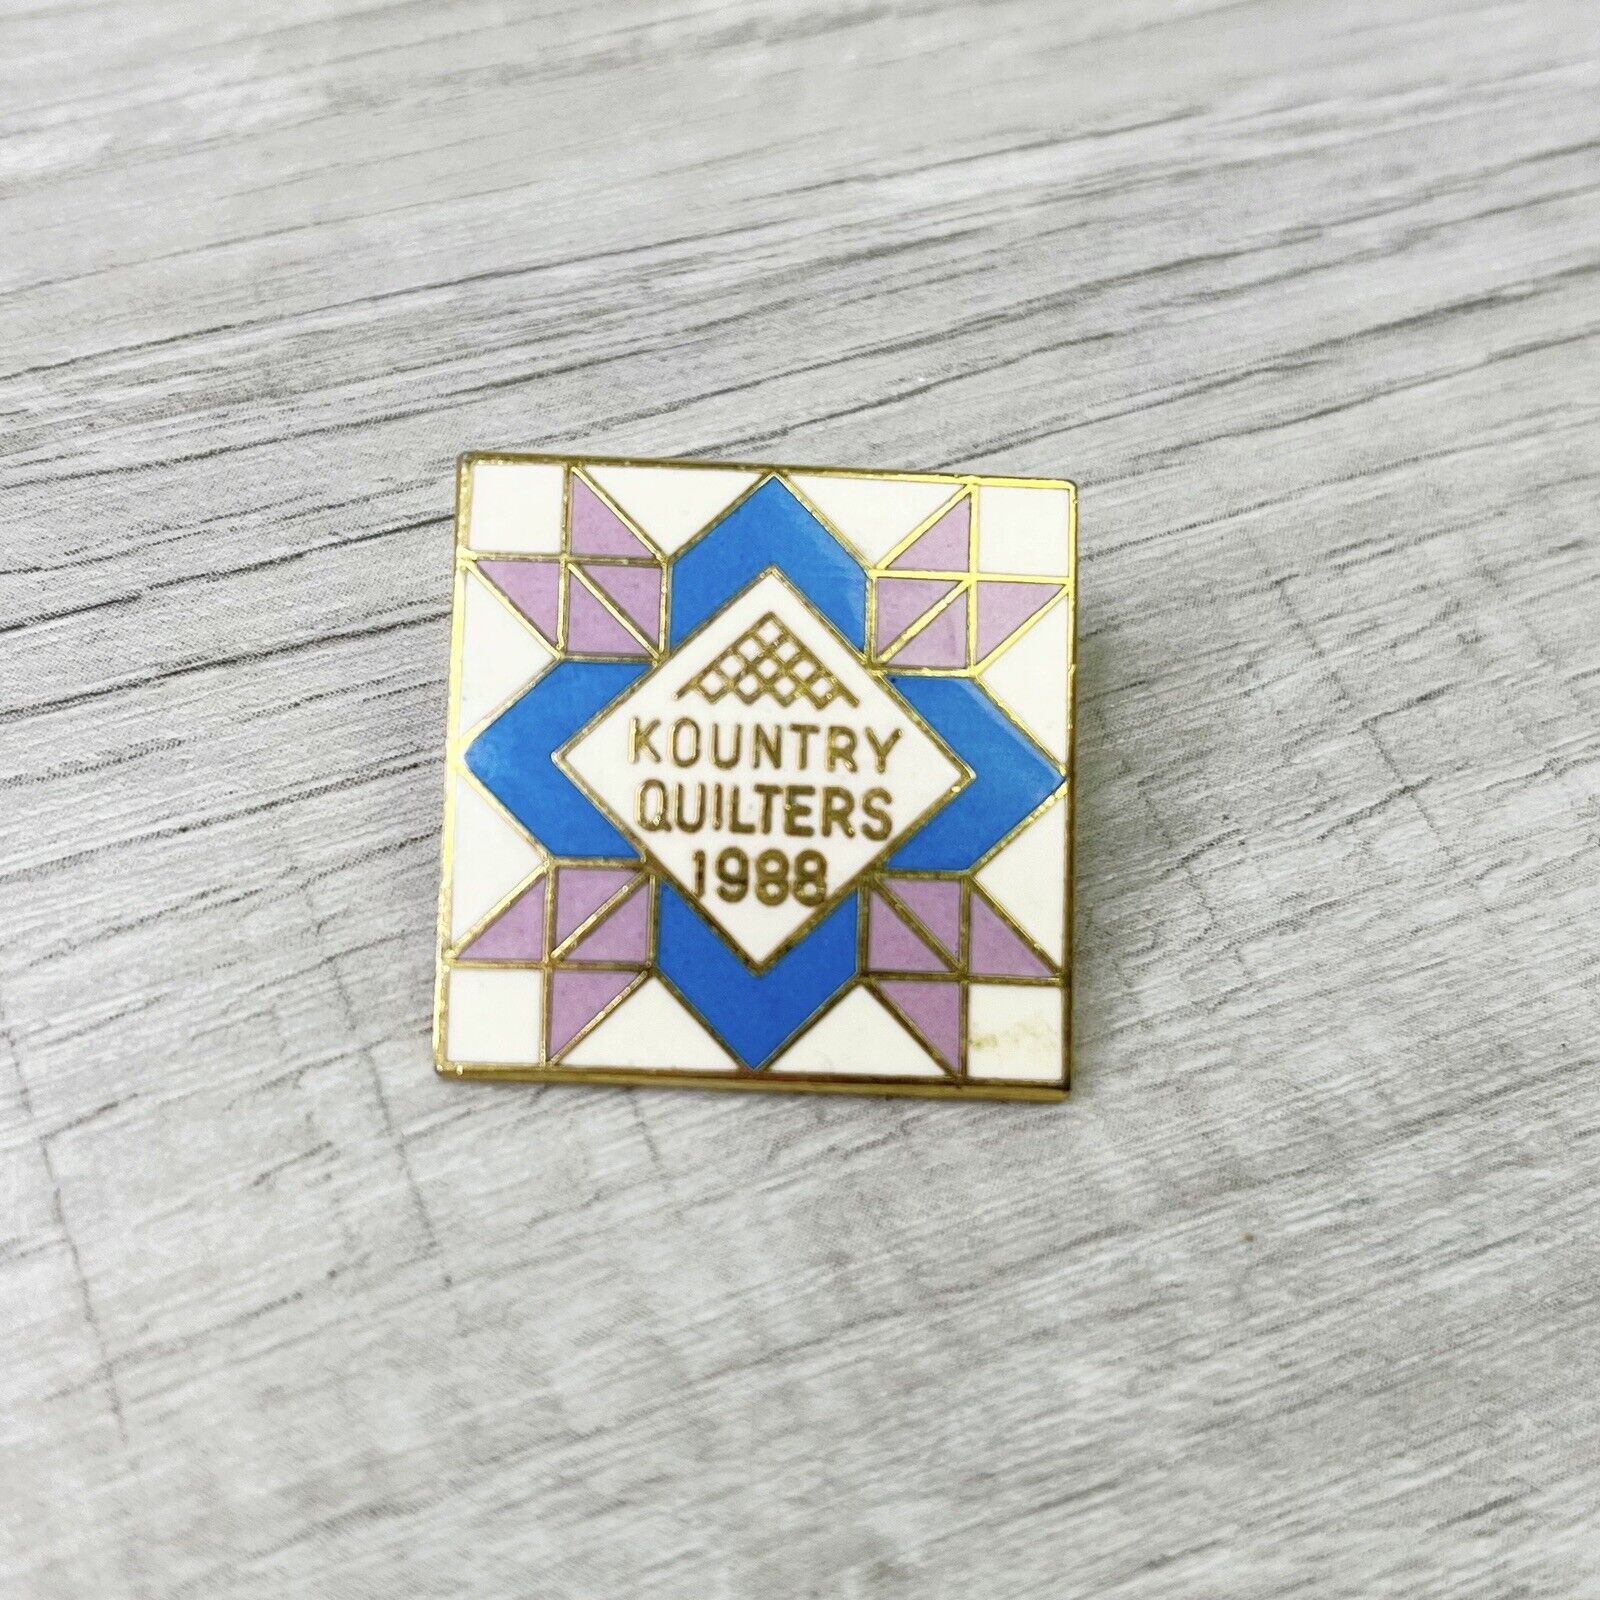 Vintage 1988 Kounrty Quilters Enamel Pin Quilters Craft Quilting